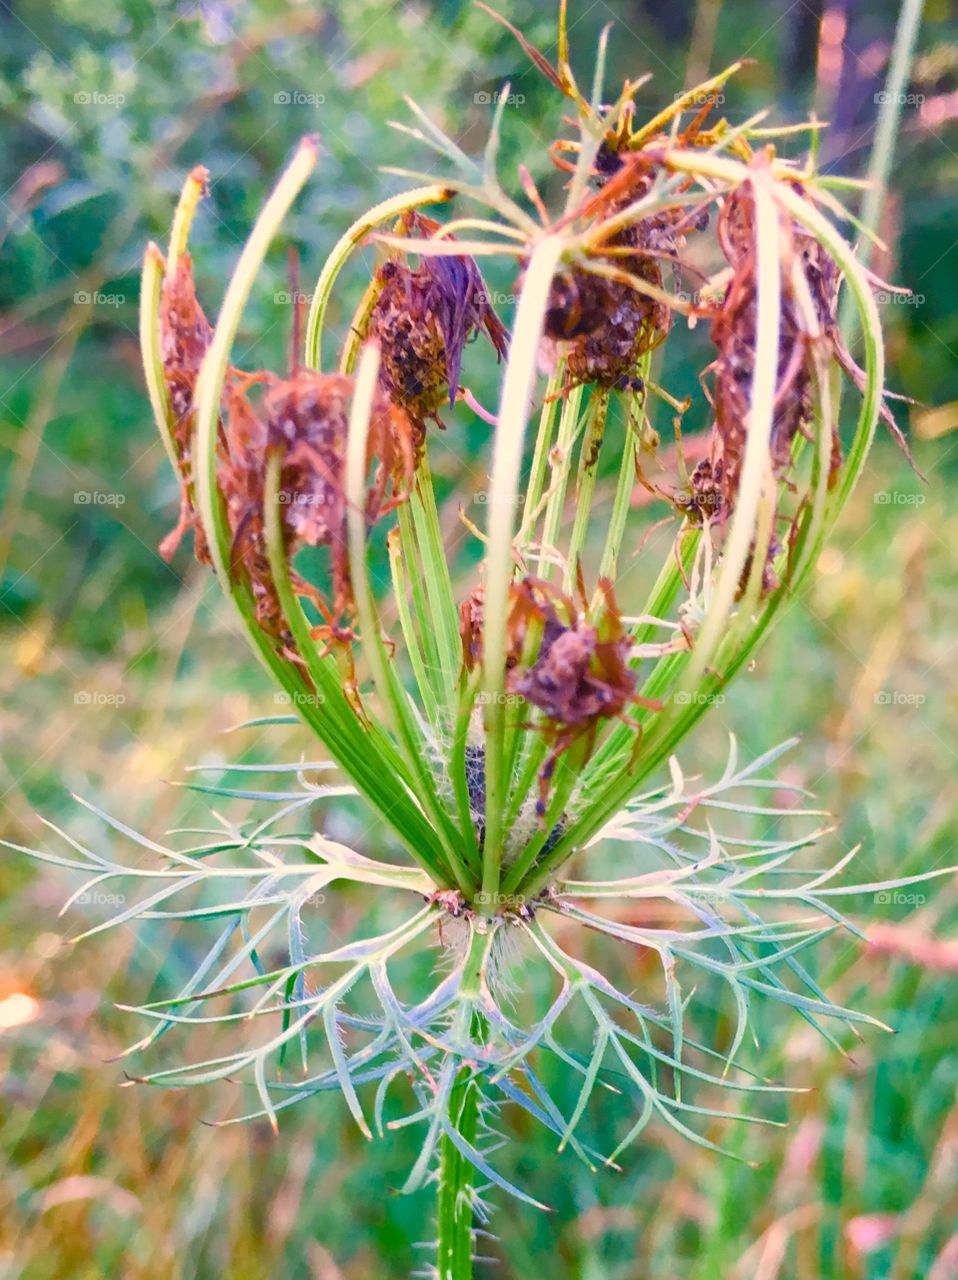 Wild carrot, after the bloom